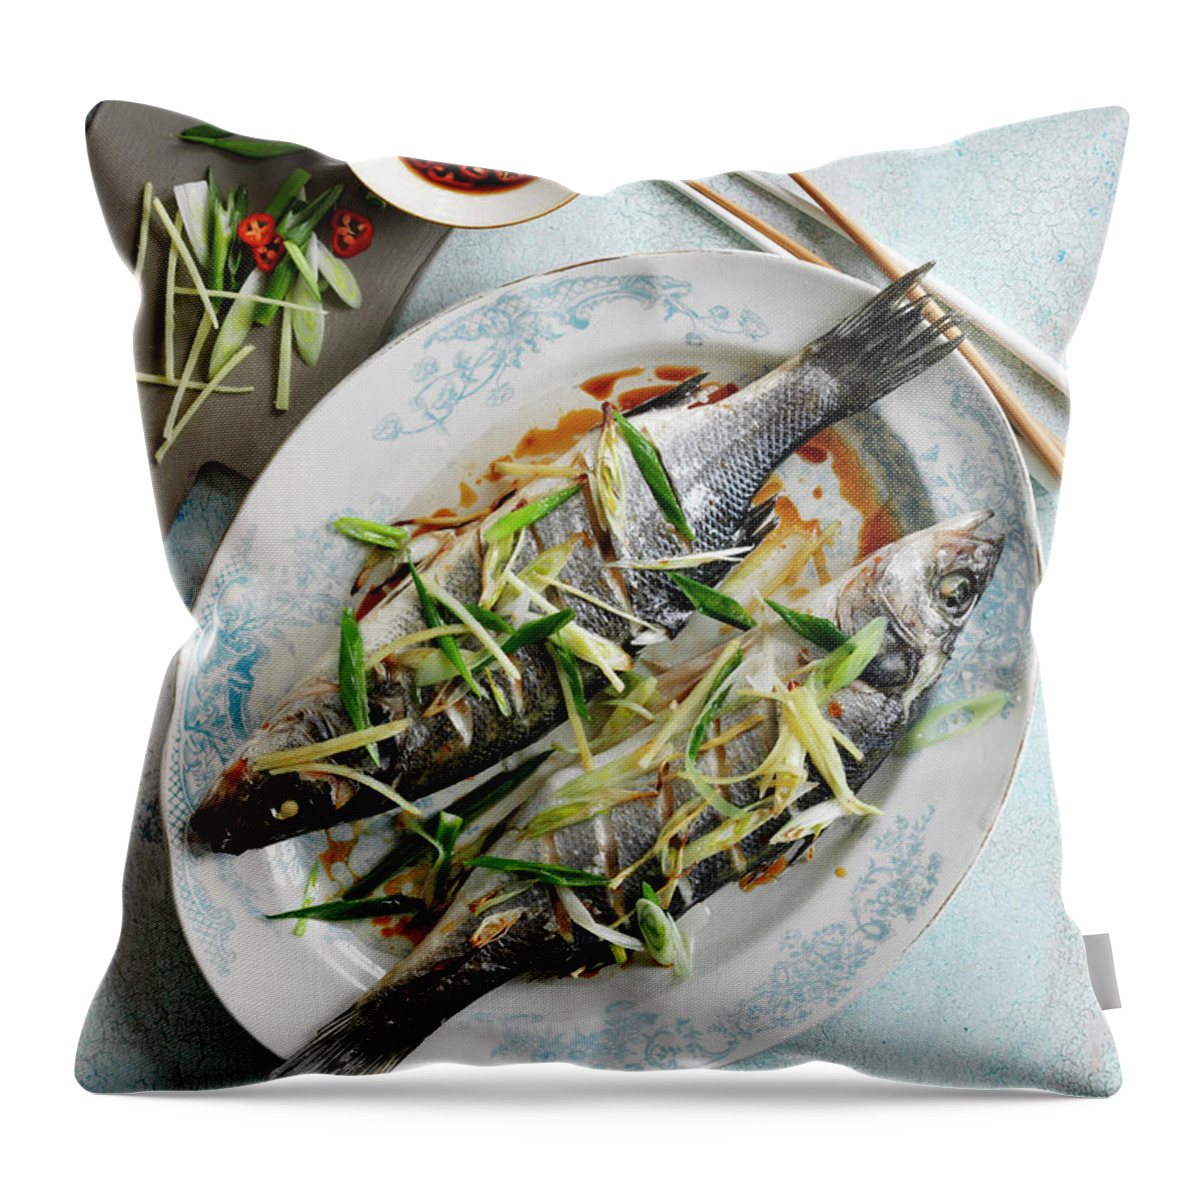 Ip_12674286 Throw Pillow featuring the photograph Steamed Fish With Ginger And Spring Onions canton, China by Gareth Morgans